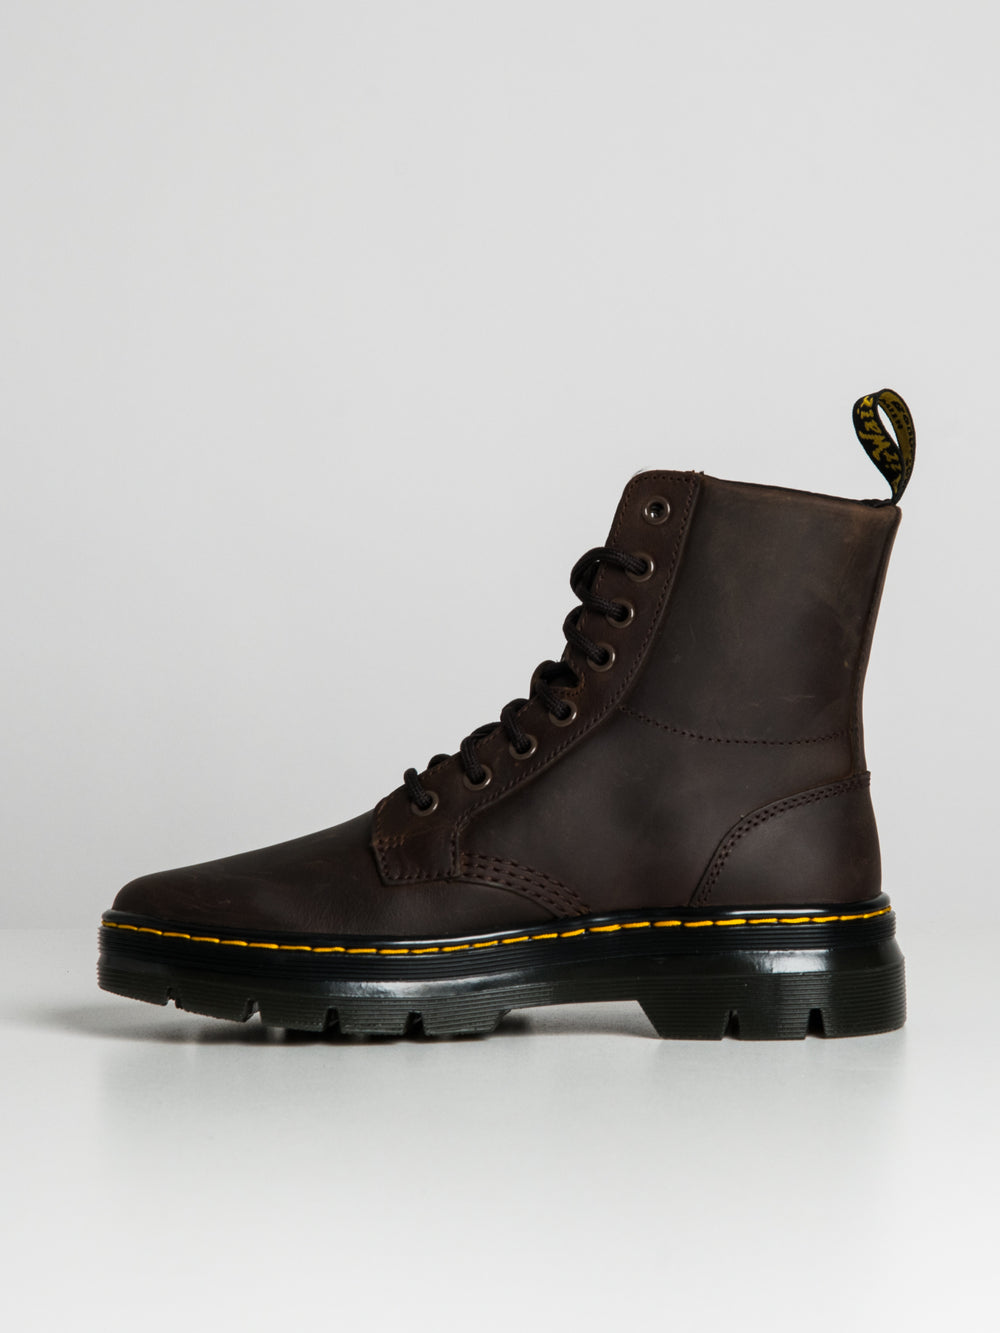 WOMENS DR MARTENS COMBS LEATHER CRAZY HORSE